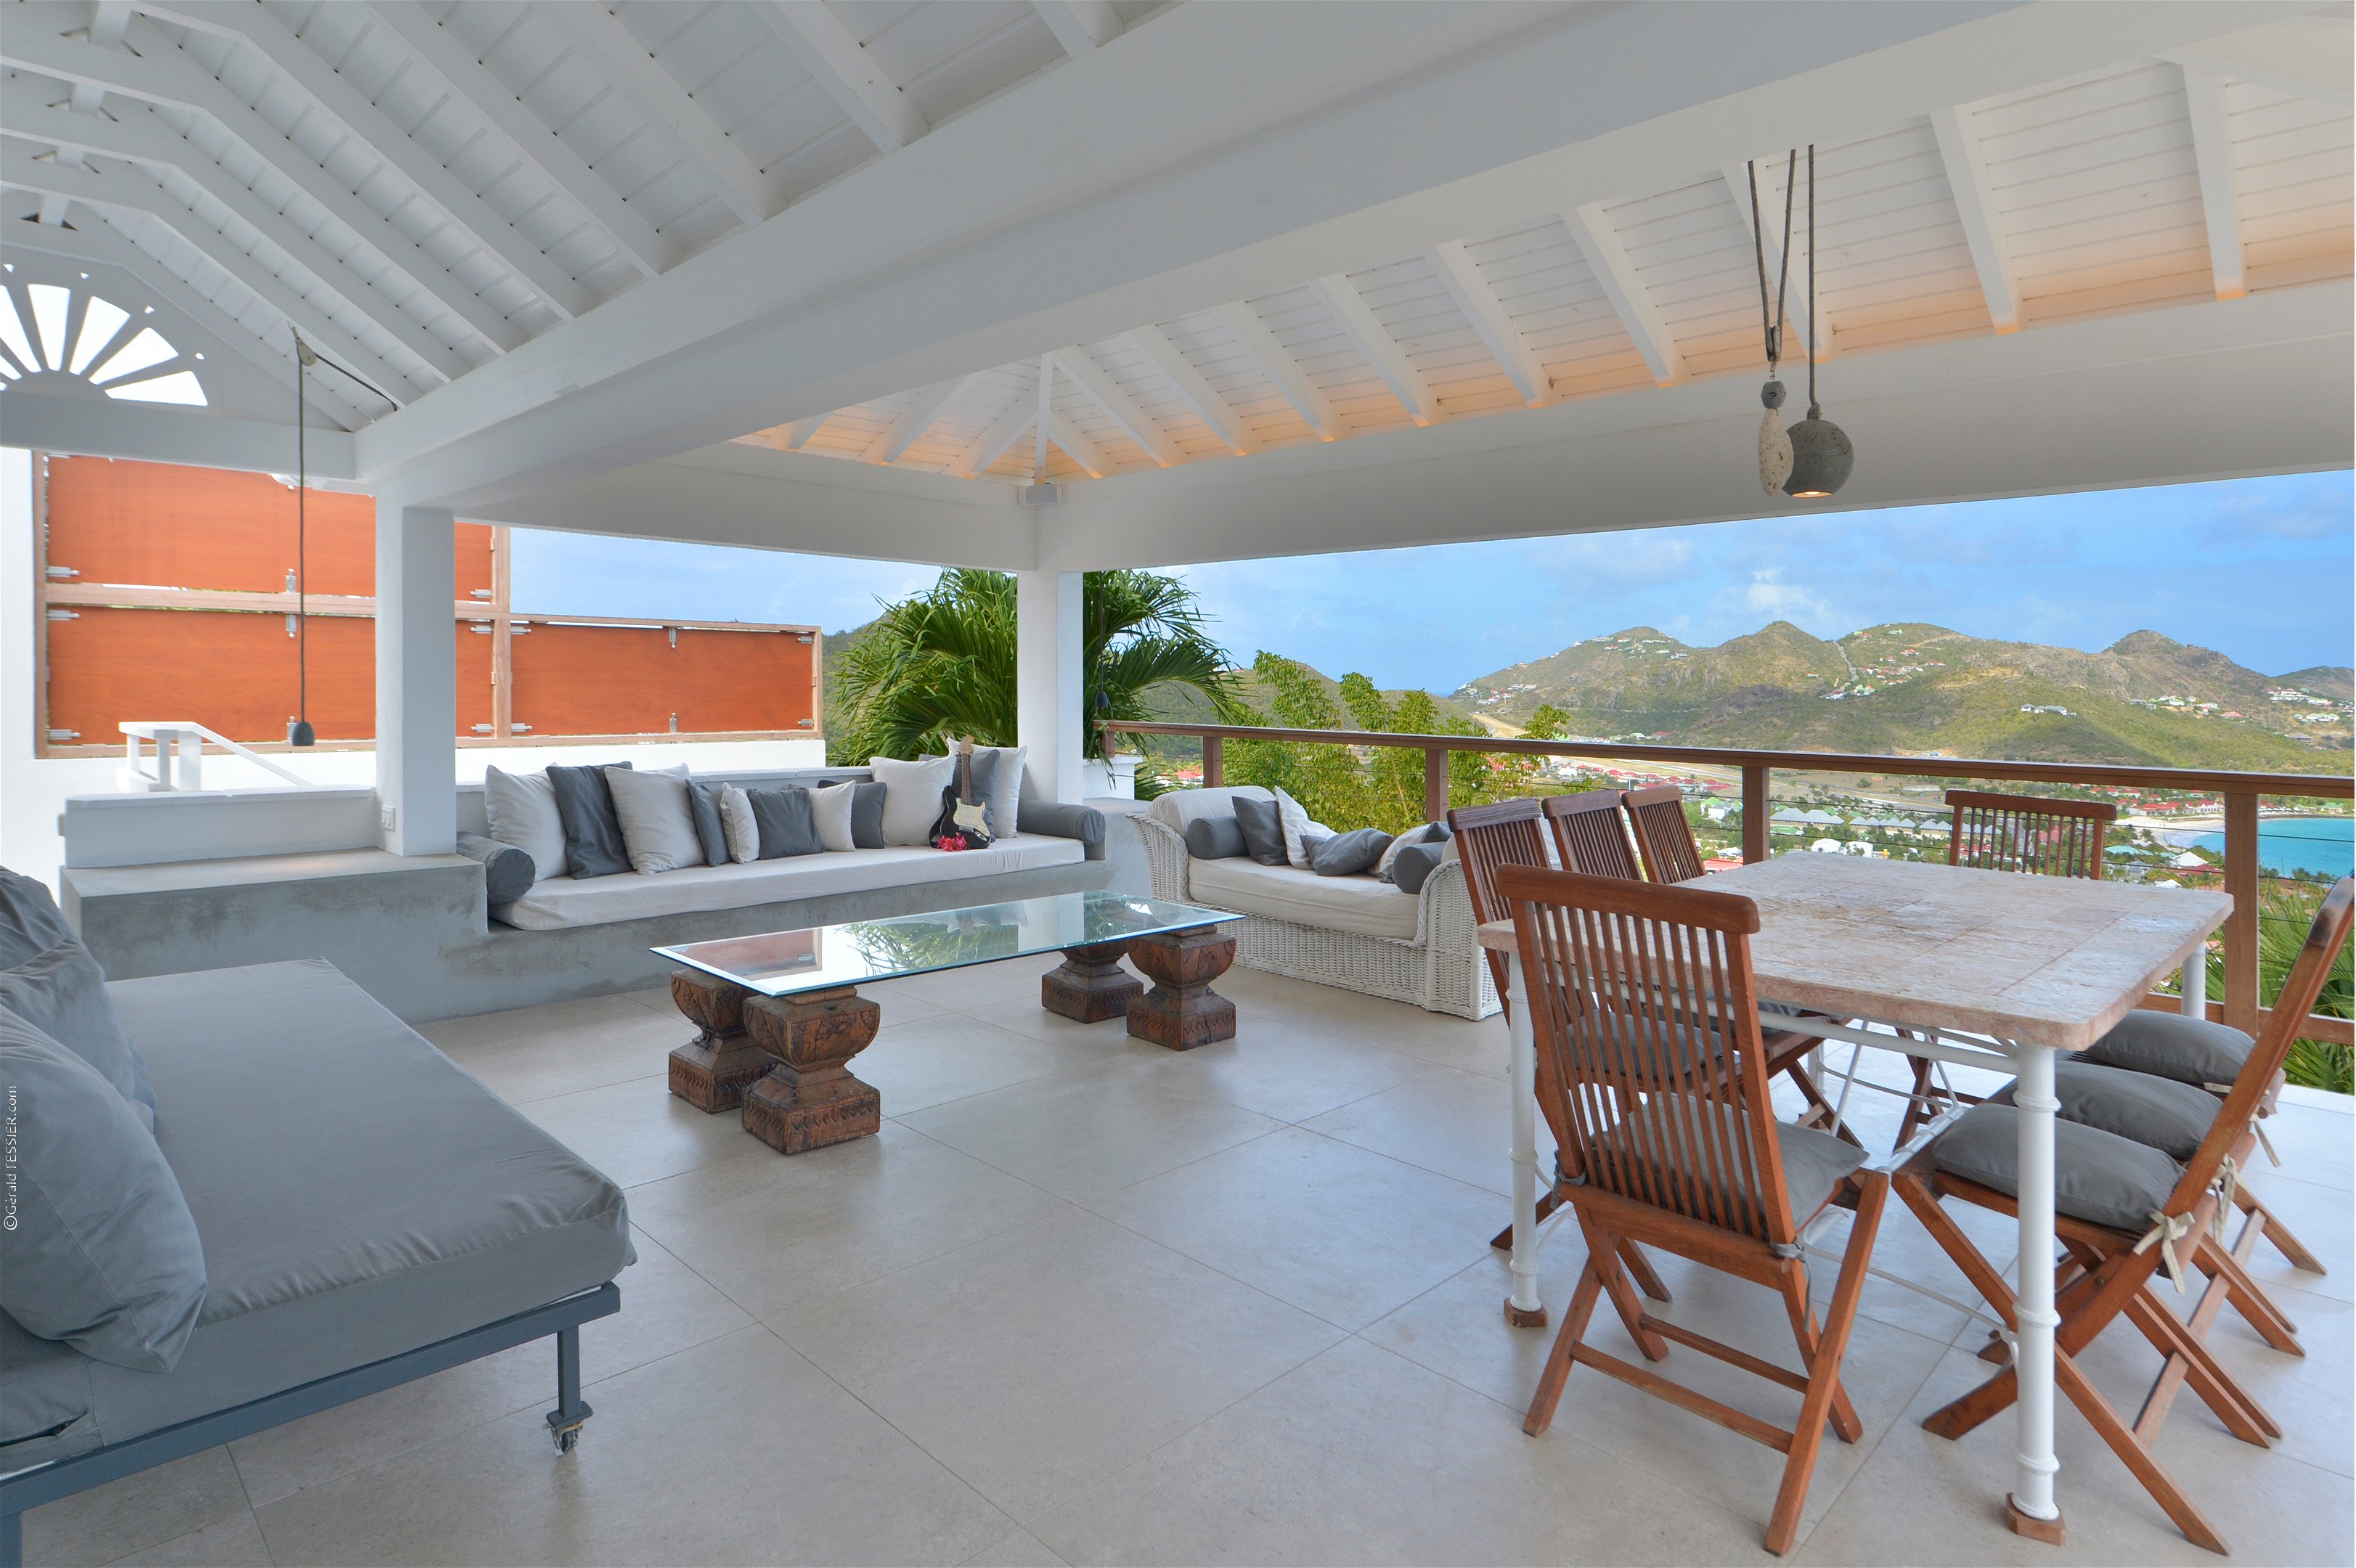 Living area on the covered terrace, with a dining table for 8 guests. 